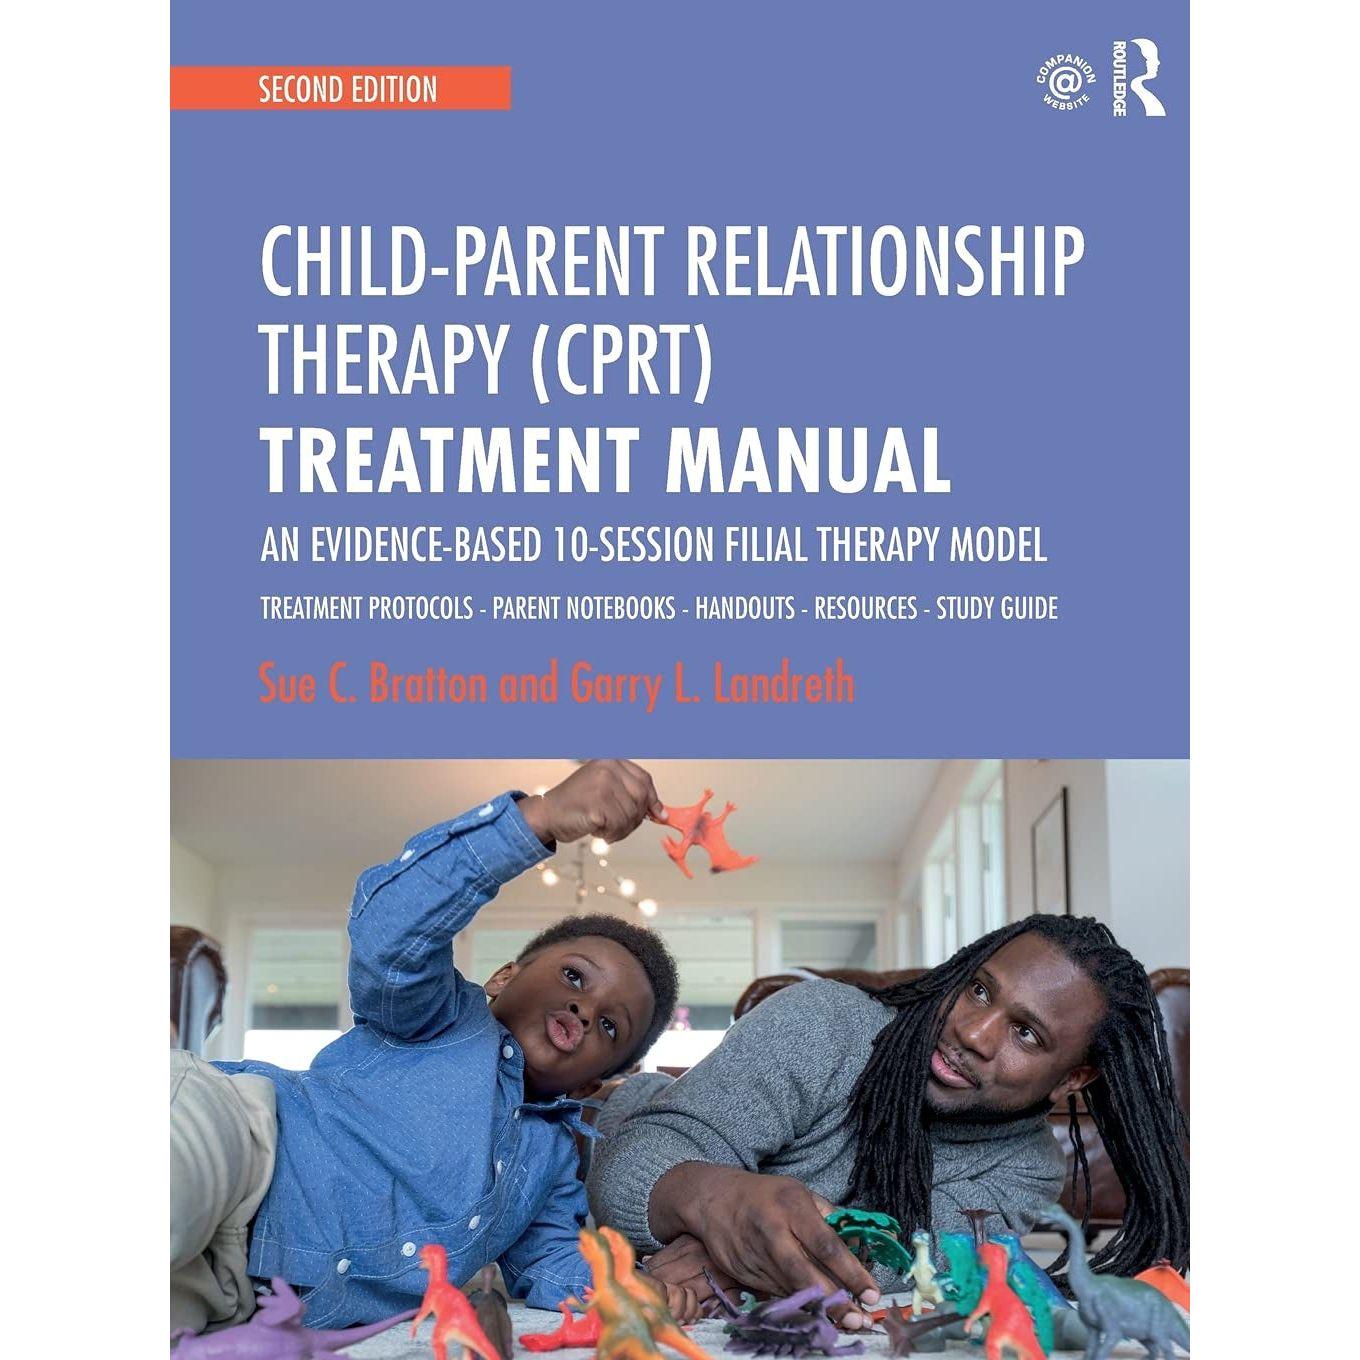 Child-Parent Relationship Therapy (CPRT) Treatment Manual: an Evidence-Based 10-Session Filial Therapy Model